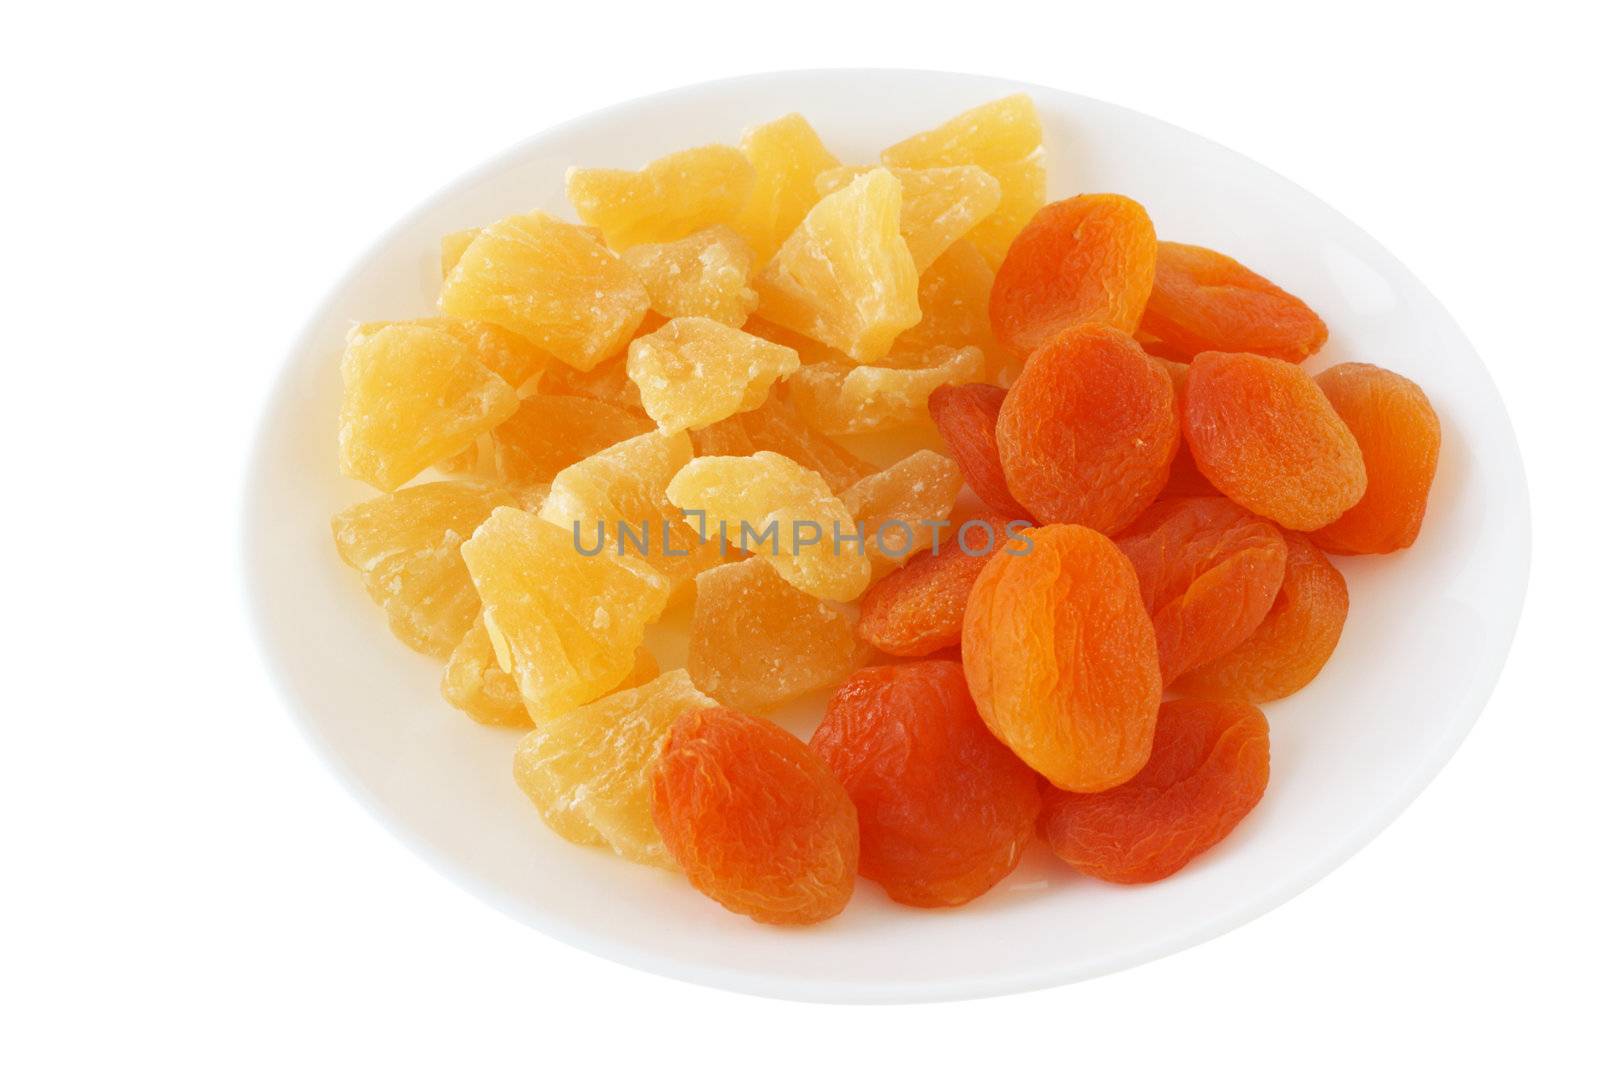 Dried apricot and pineapple